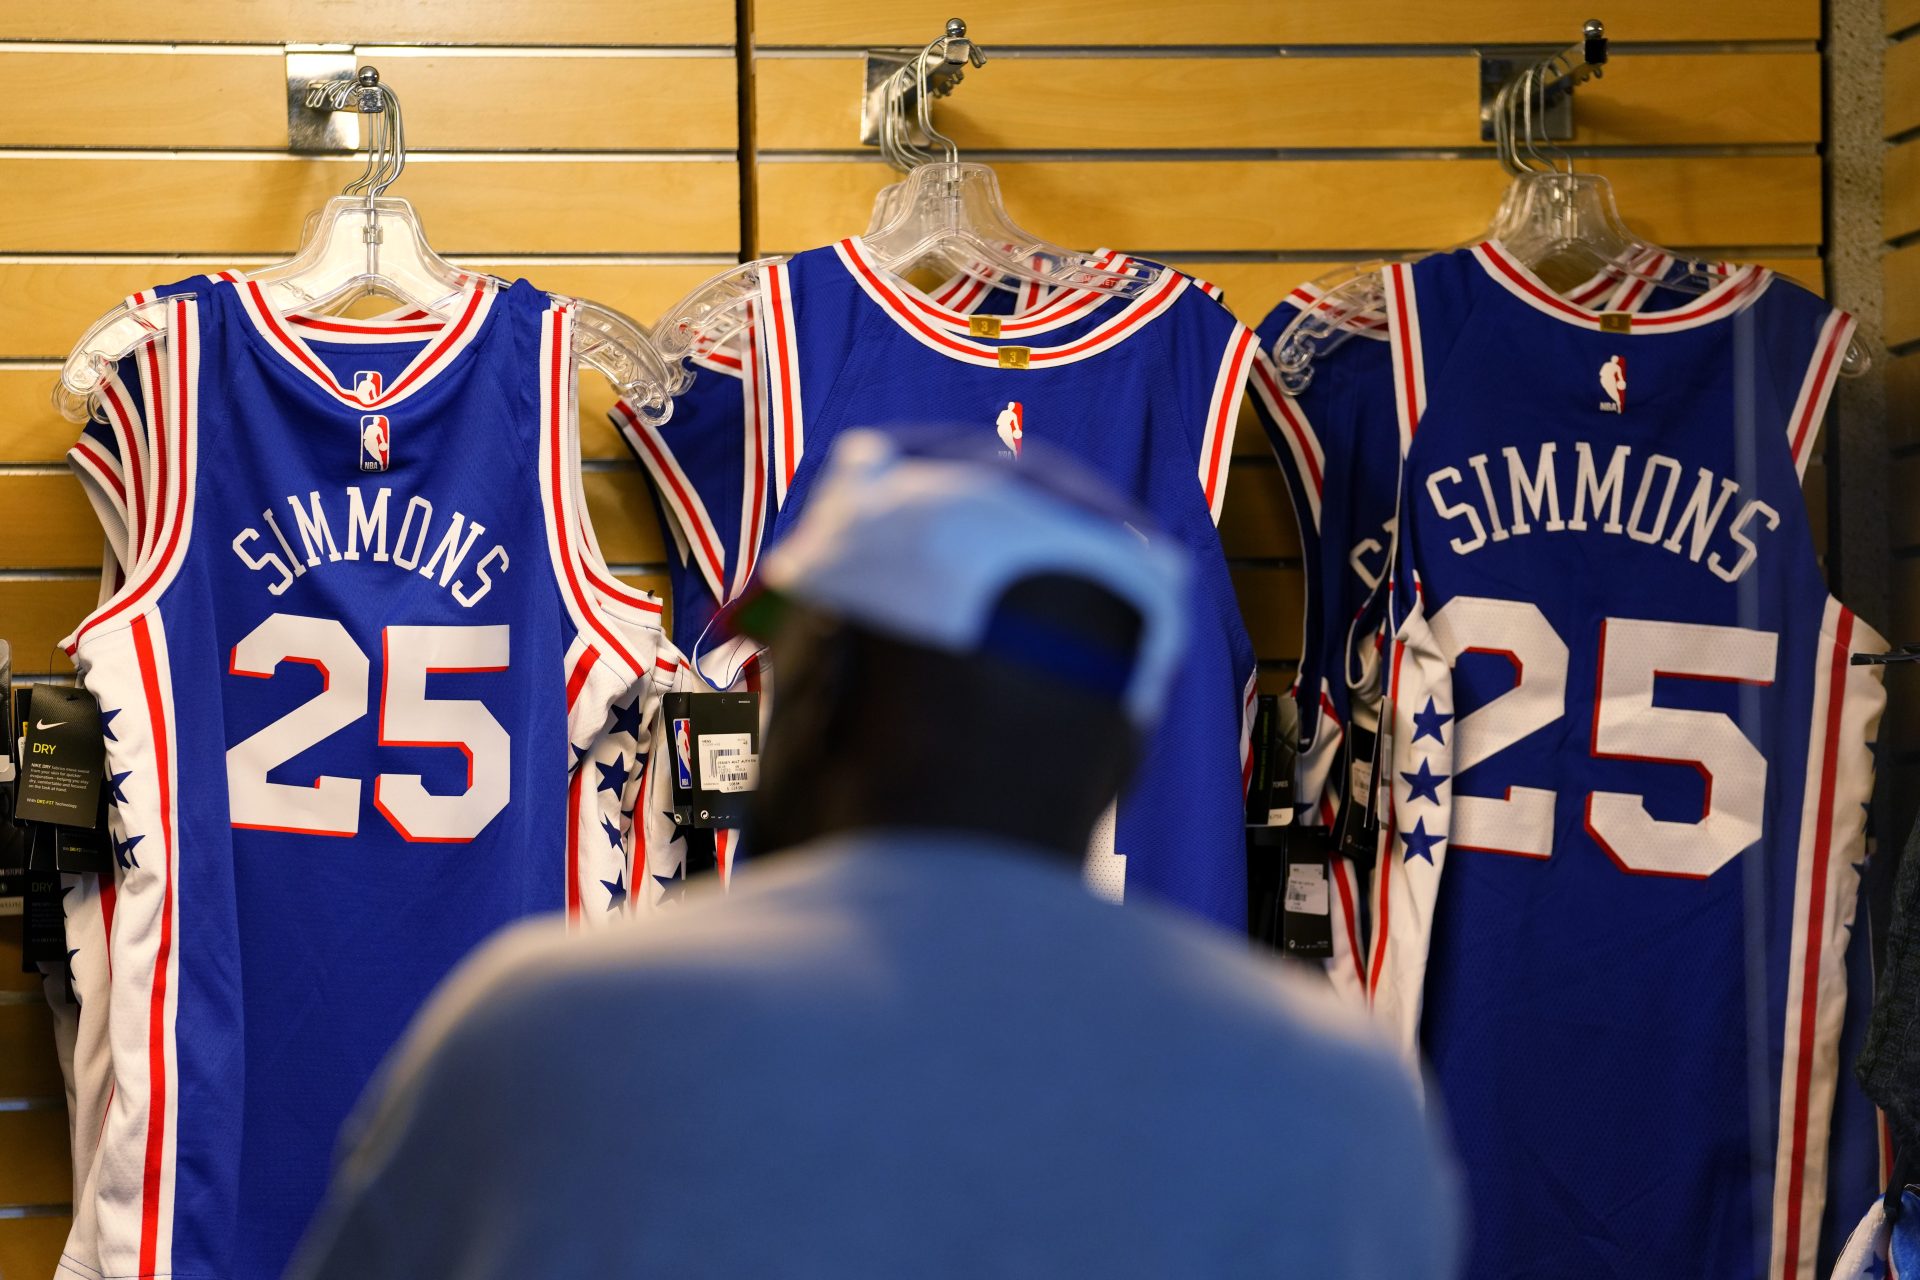 A fan shops for souvenirs before a preseason NBA basketball game between the Philadelphia 76ers and the Toronto Raptors, Thursday, Oct. 7, 2021, in Philadelphia.